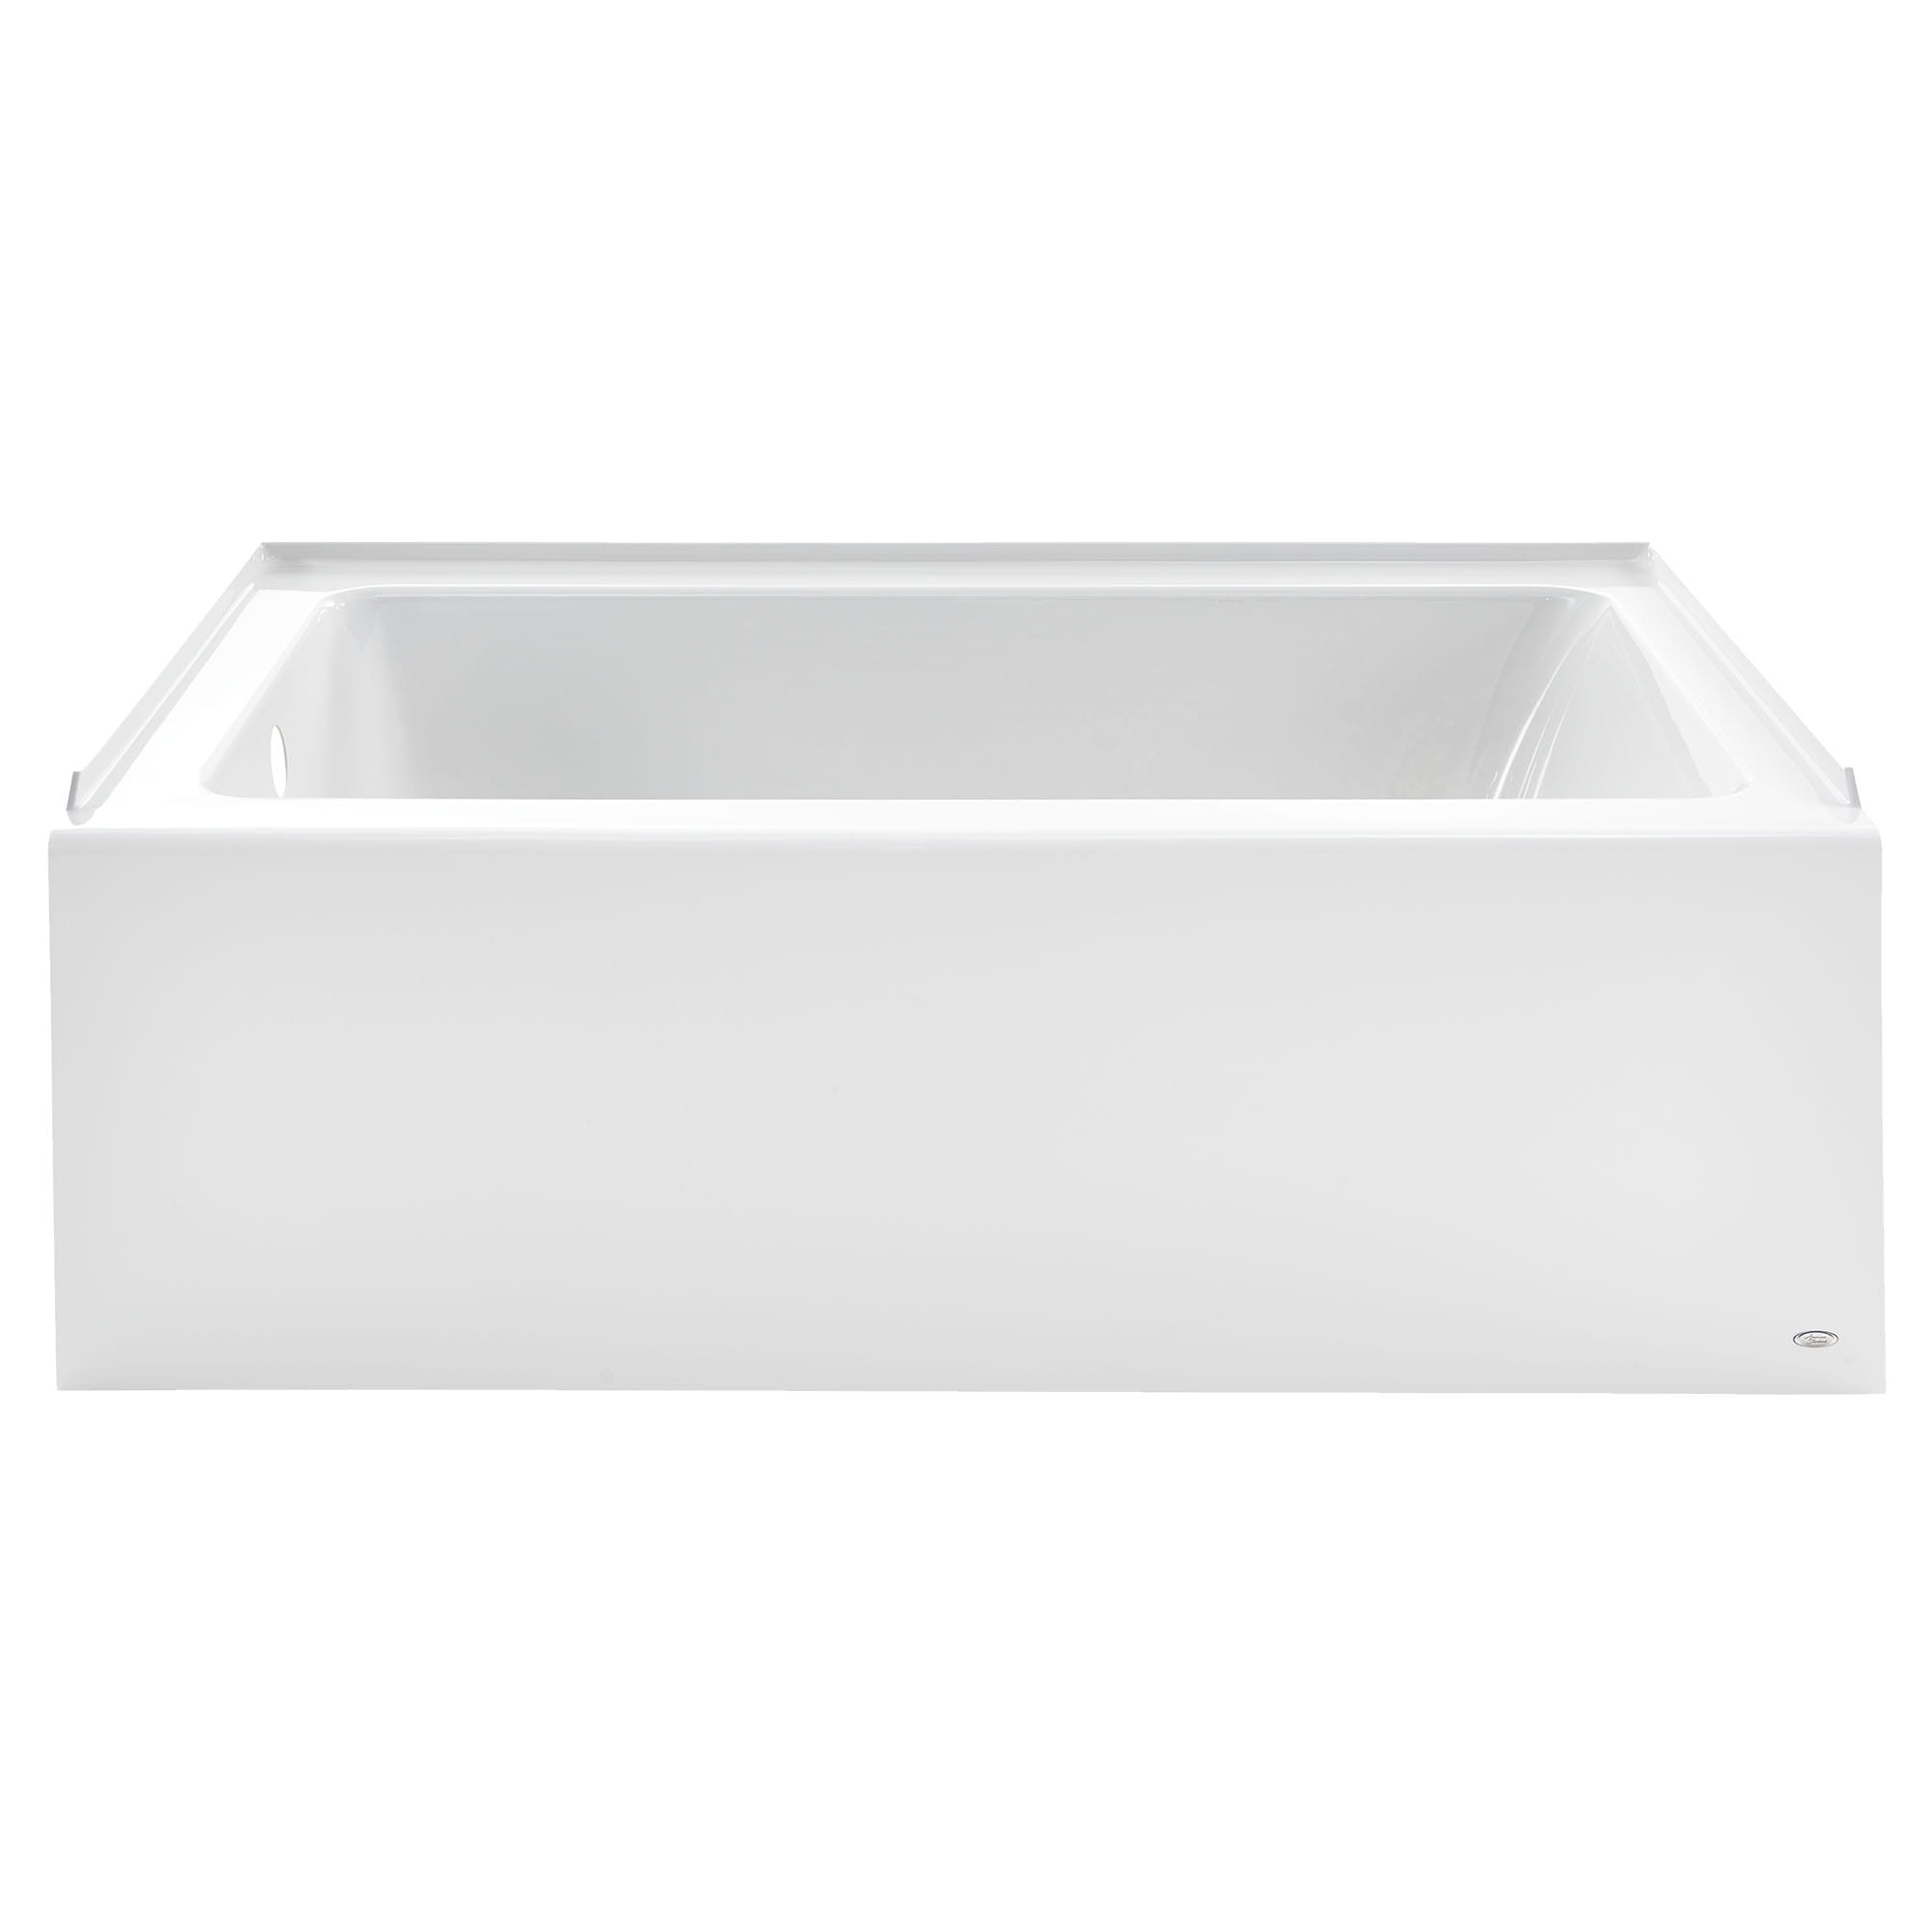 Studio® 60 x 30-Inch Integral Apron Bathtub With Left-Hand Outlet